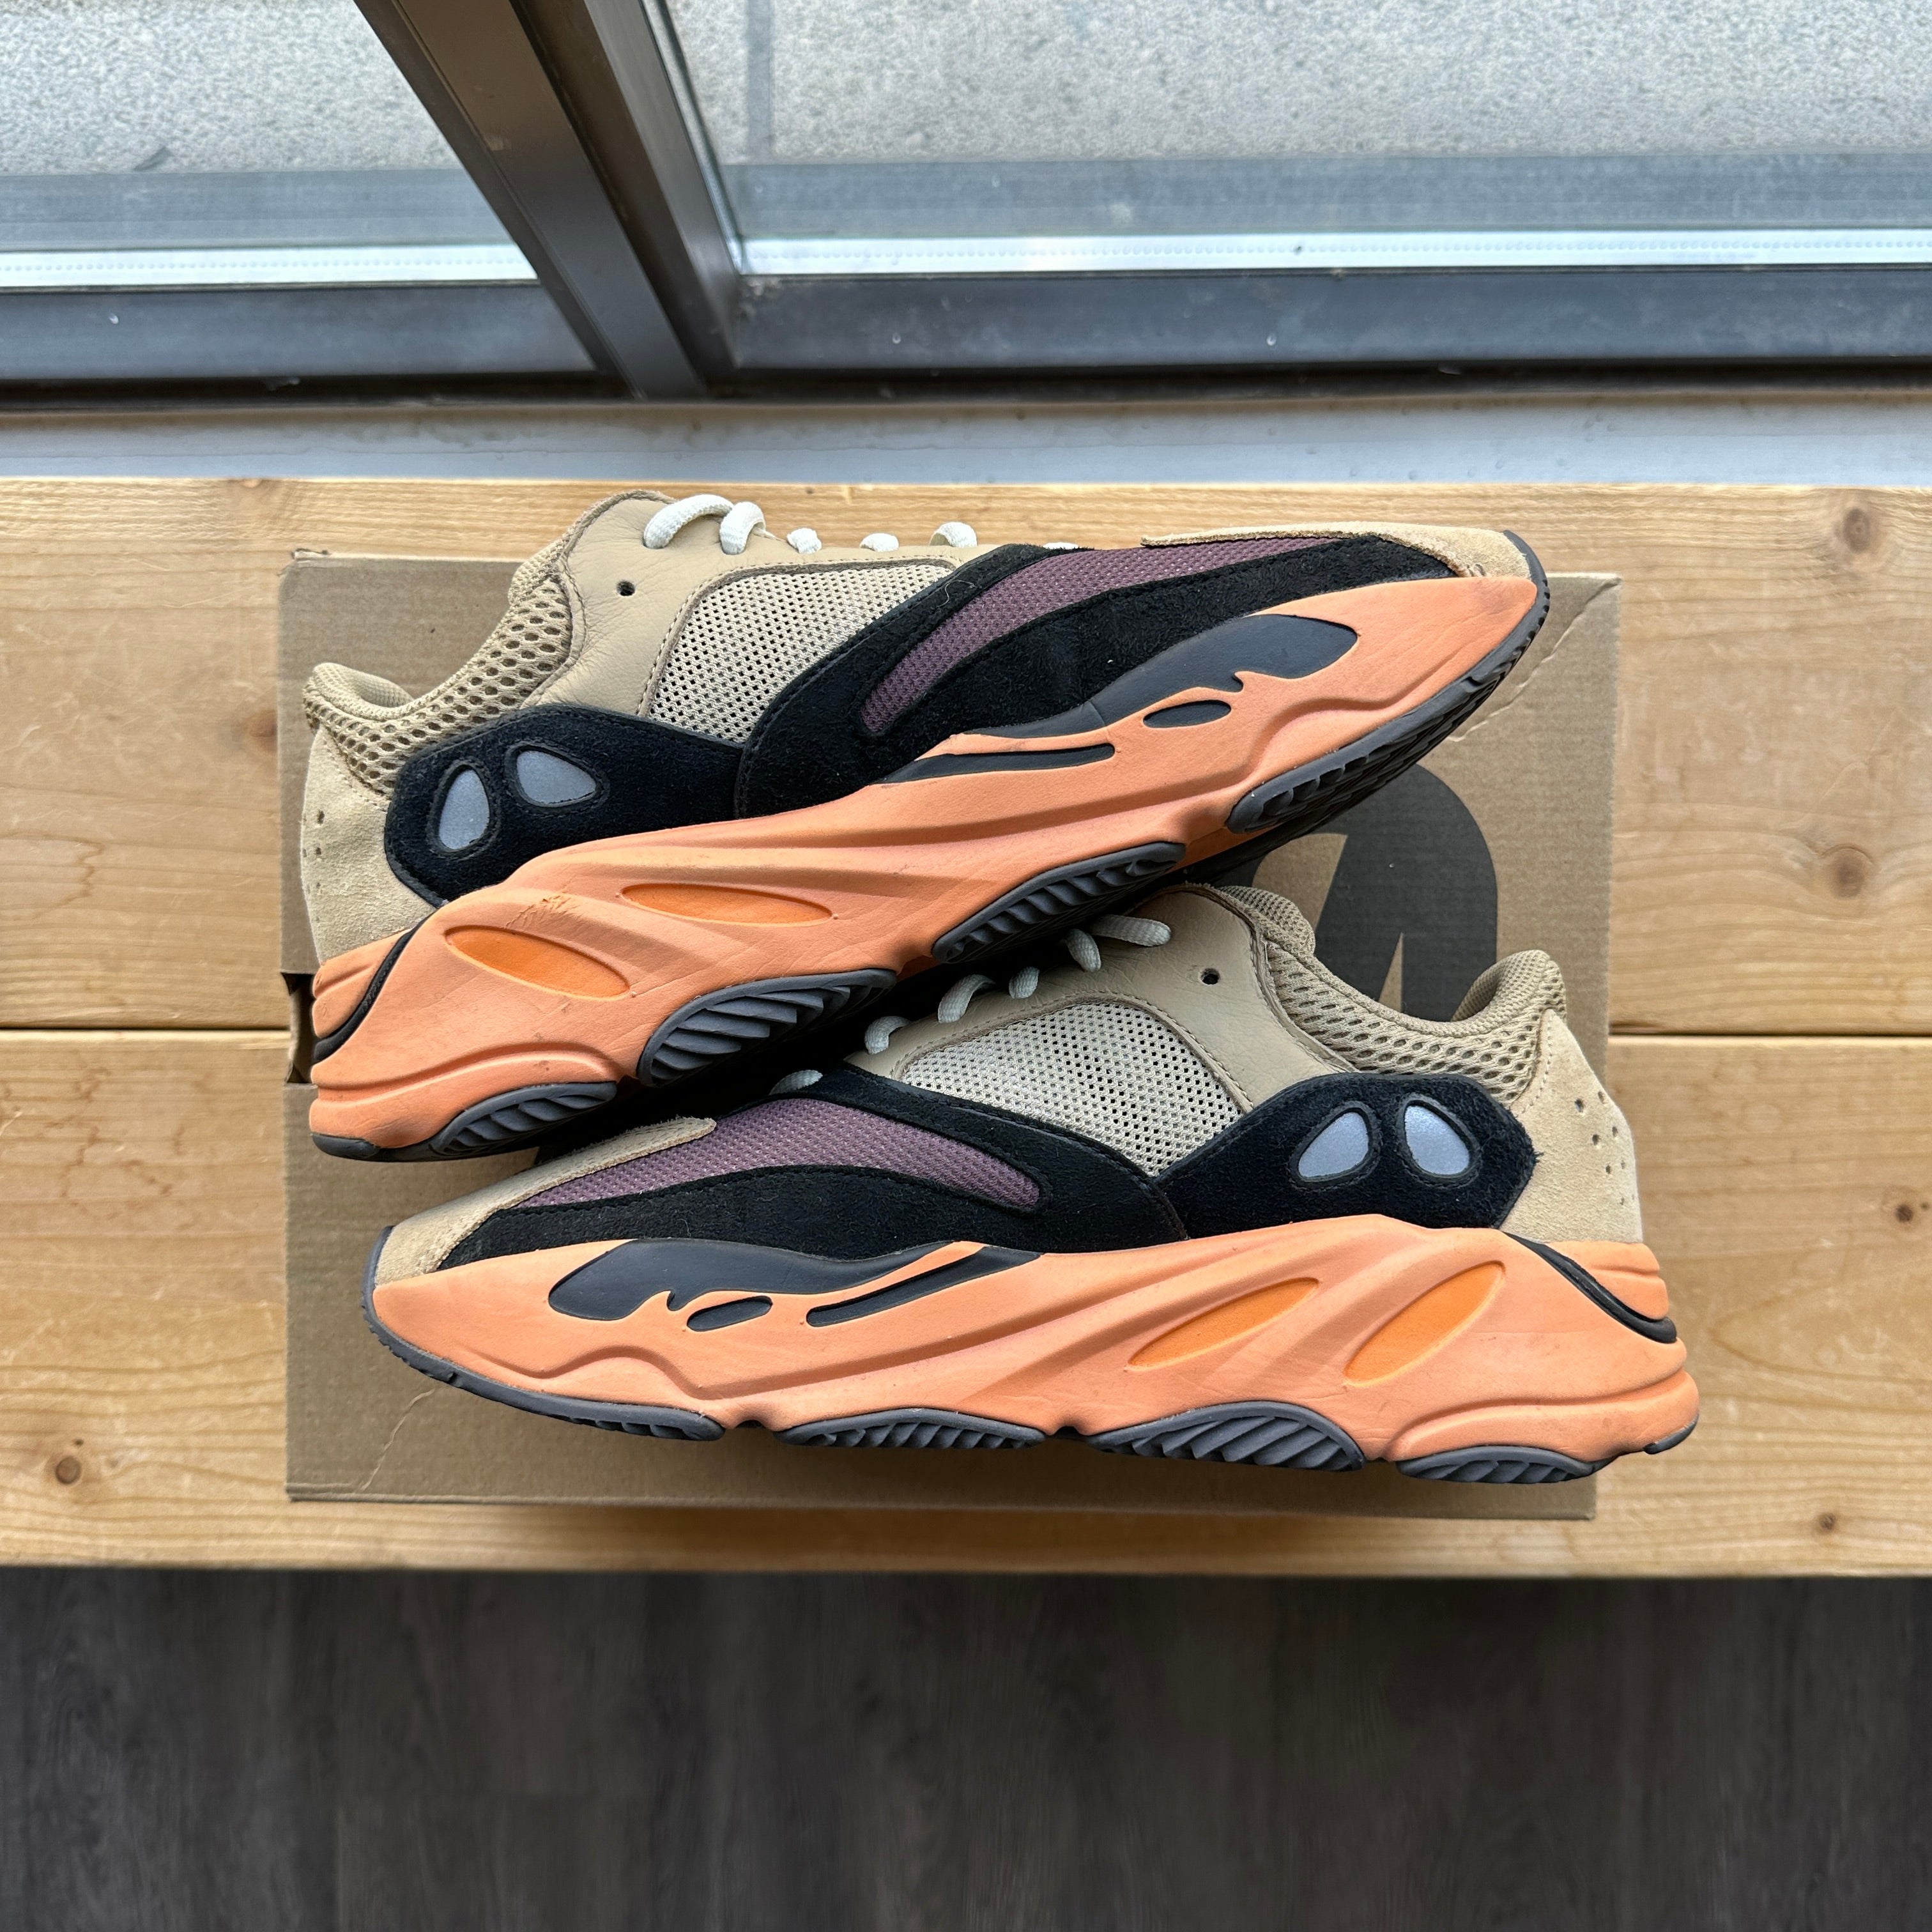 Yeezy 700 "Enflame Ember" Size 9.5